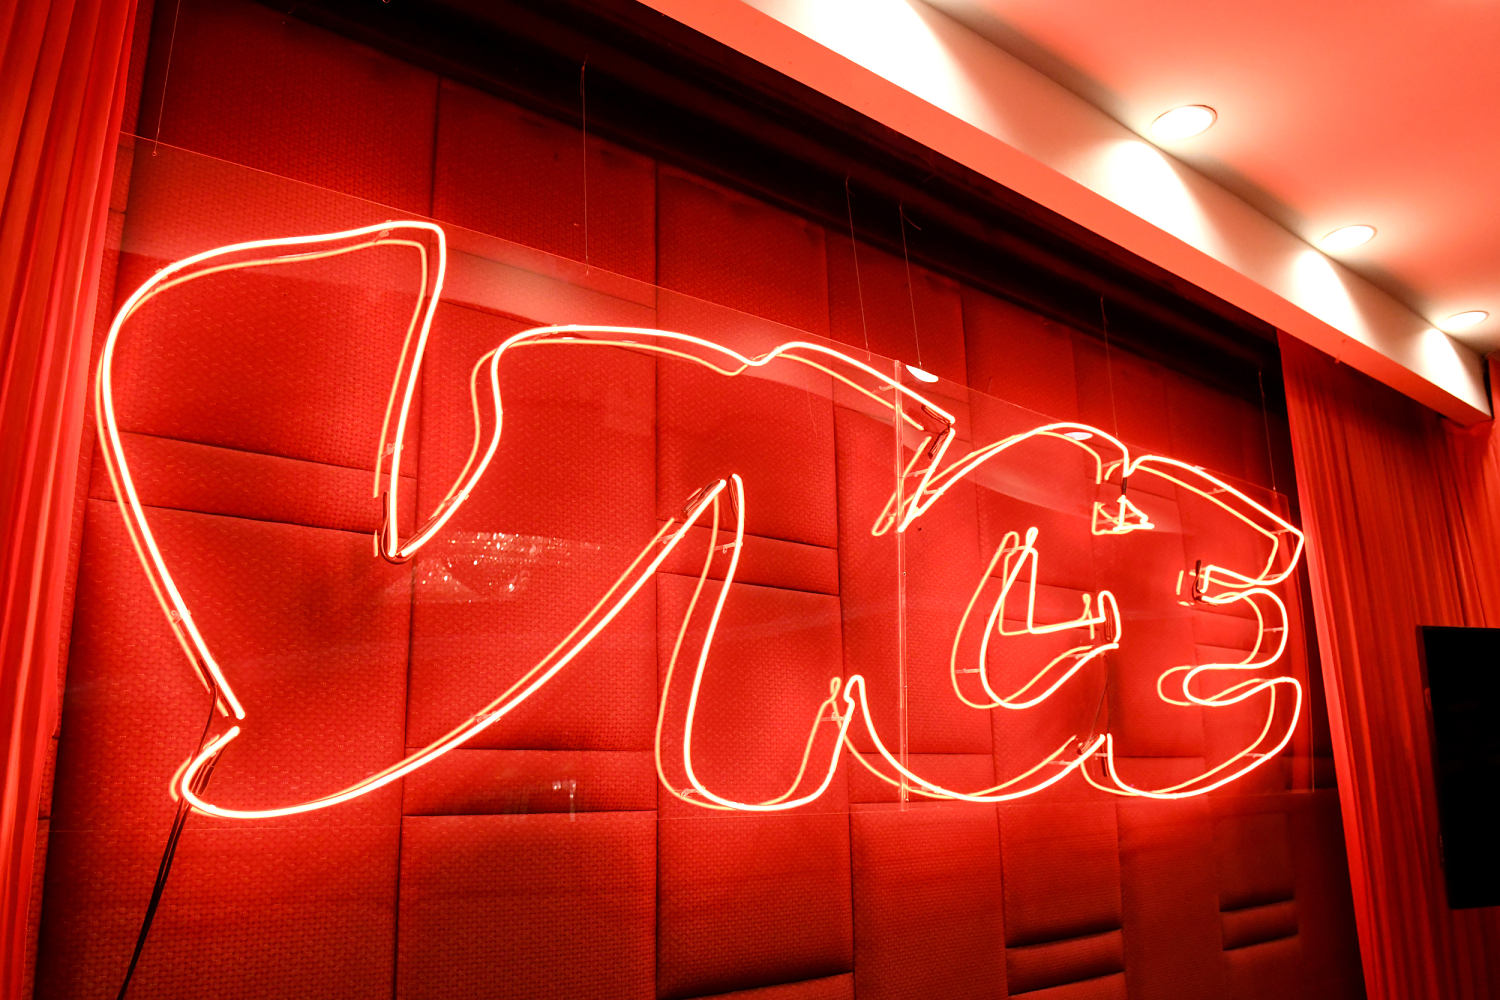 Vice Media plans to cut hundreds of jobs, stop publishing on flagship website